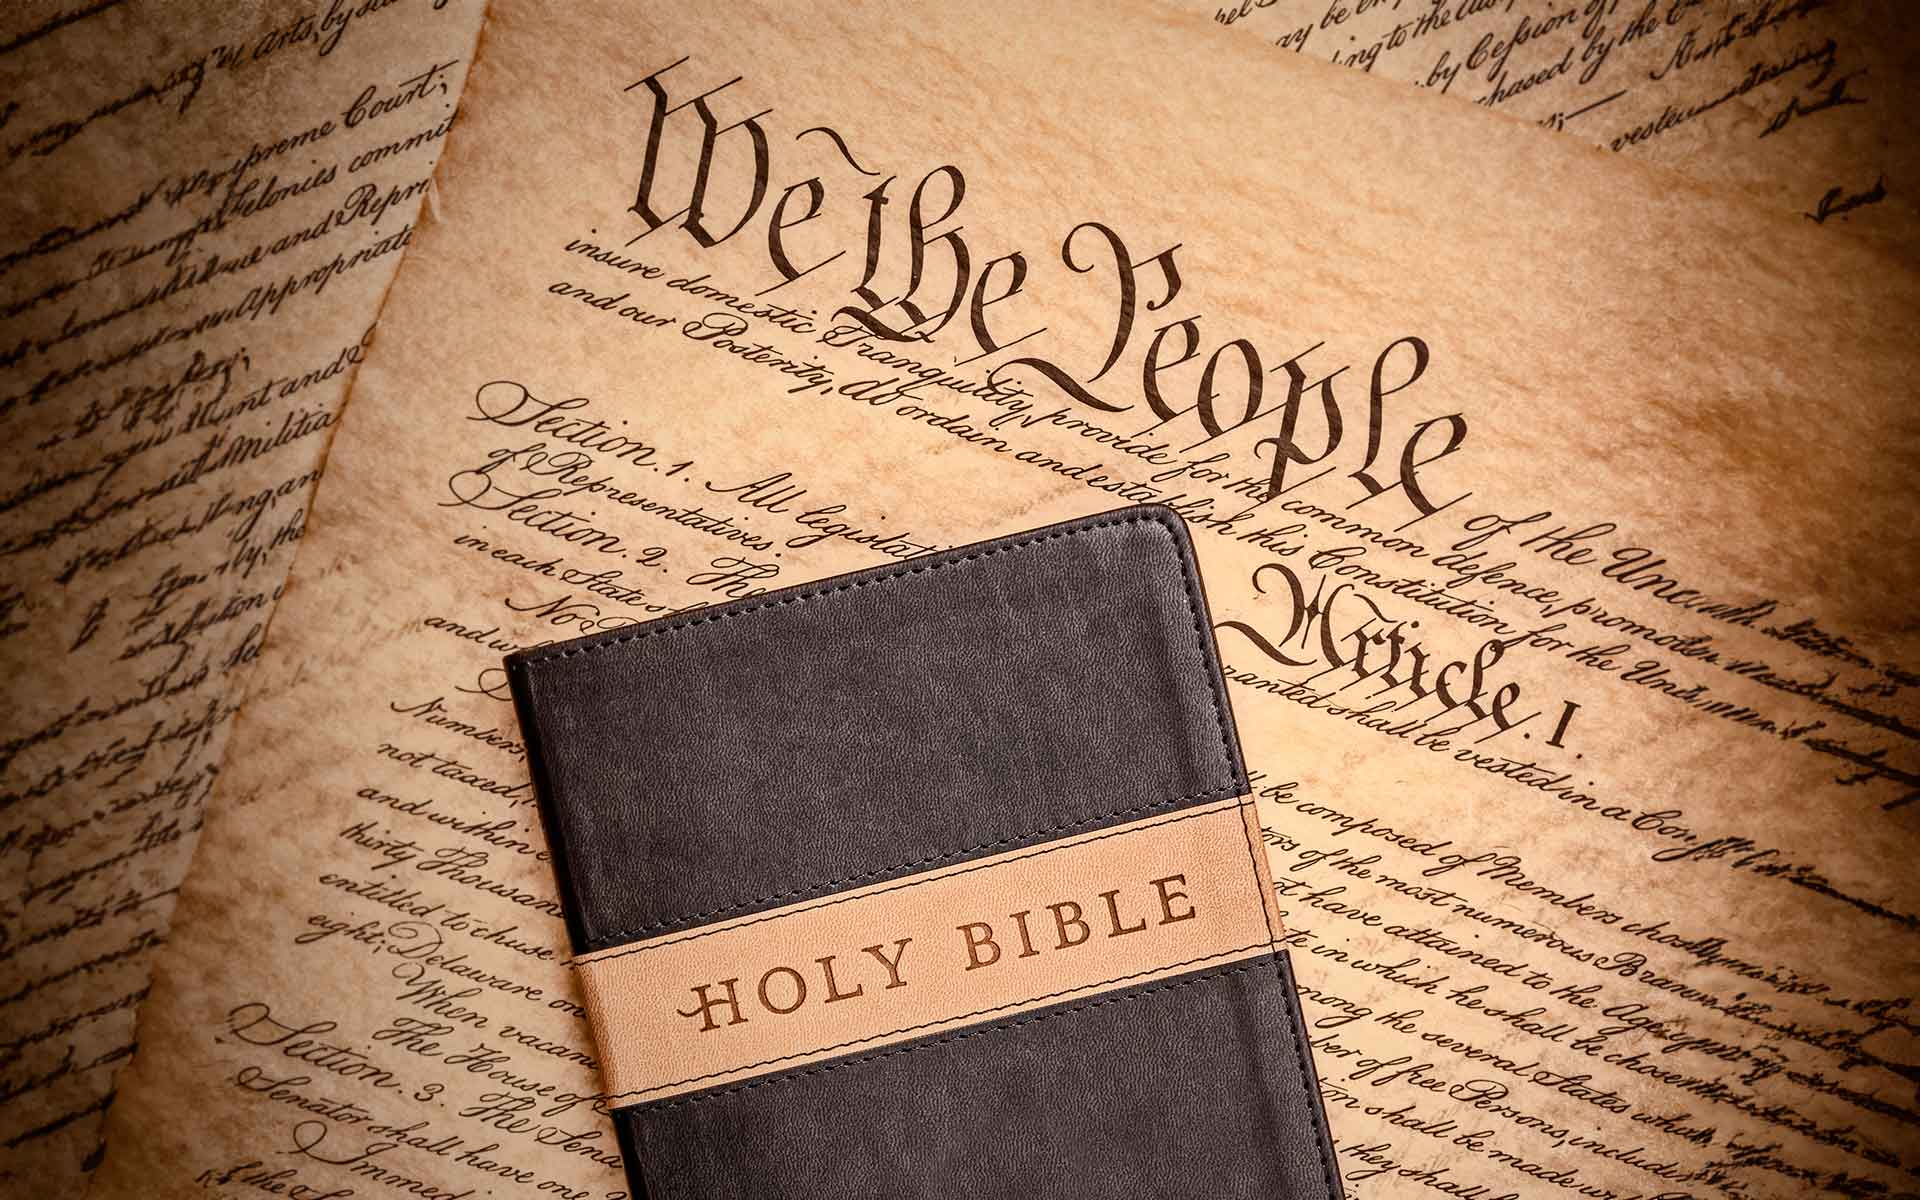 Law and Faith: Defending Religious Freedom - Part 2